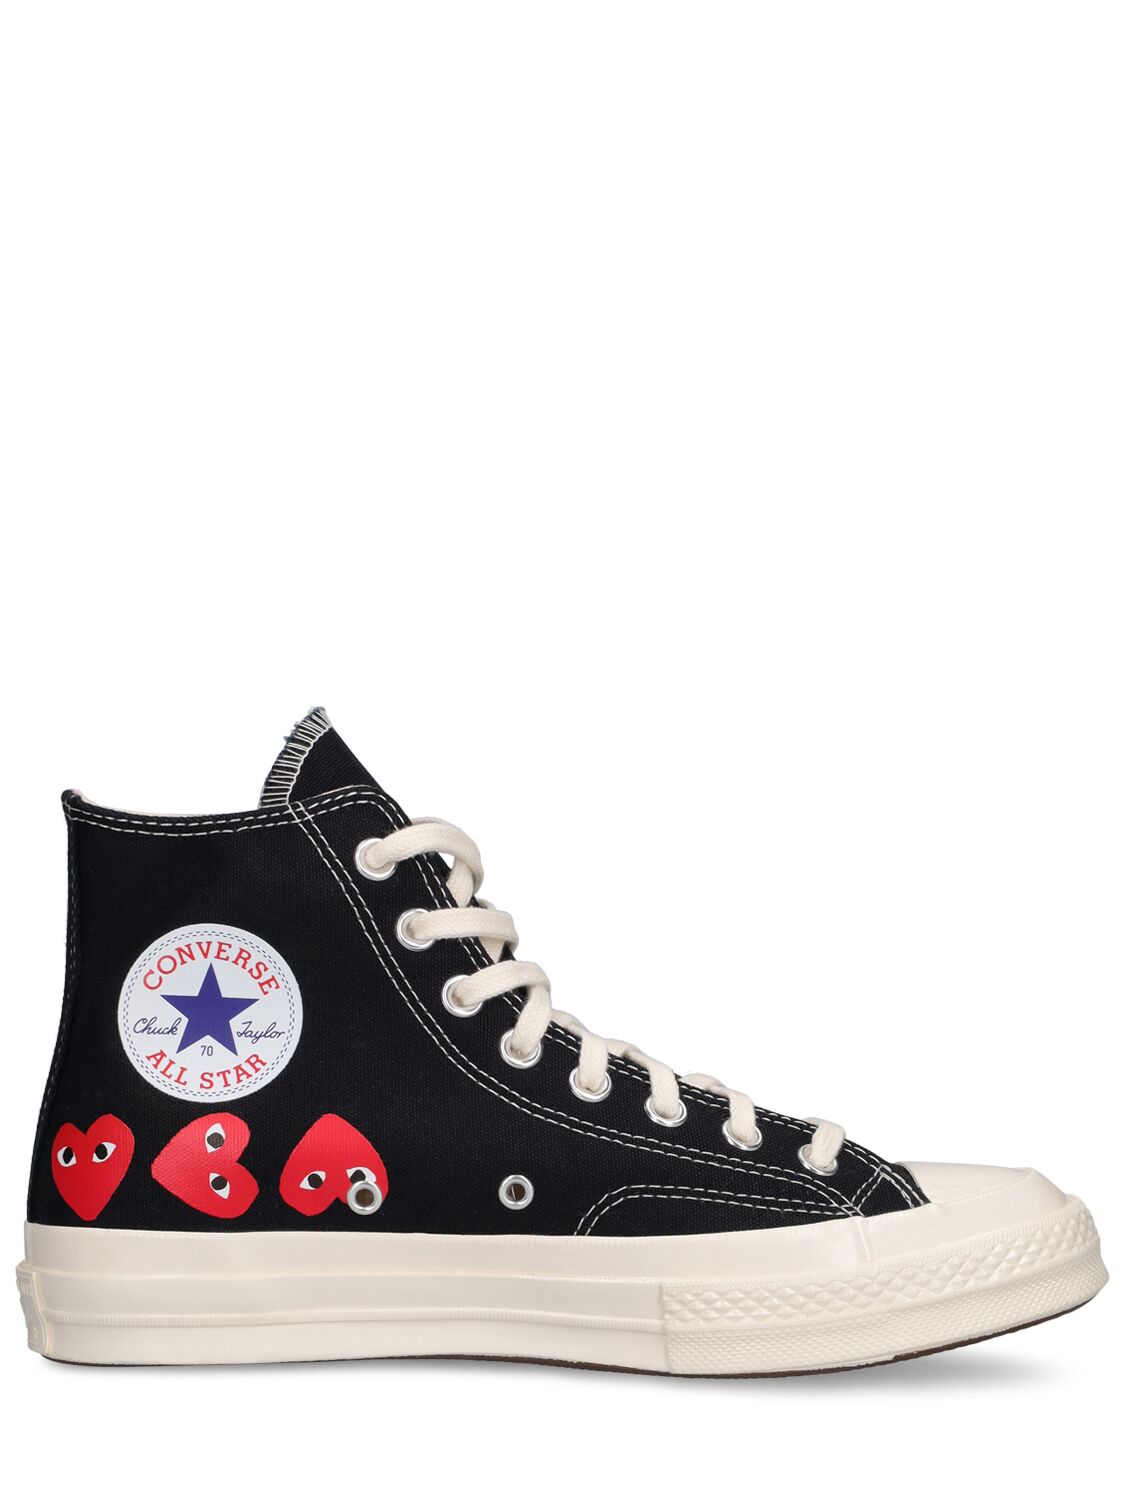 Comme Des Garçons Play 20mm Play Converse Cotton Trainers In Black